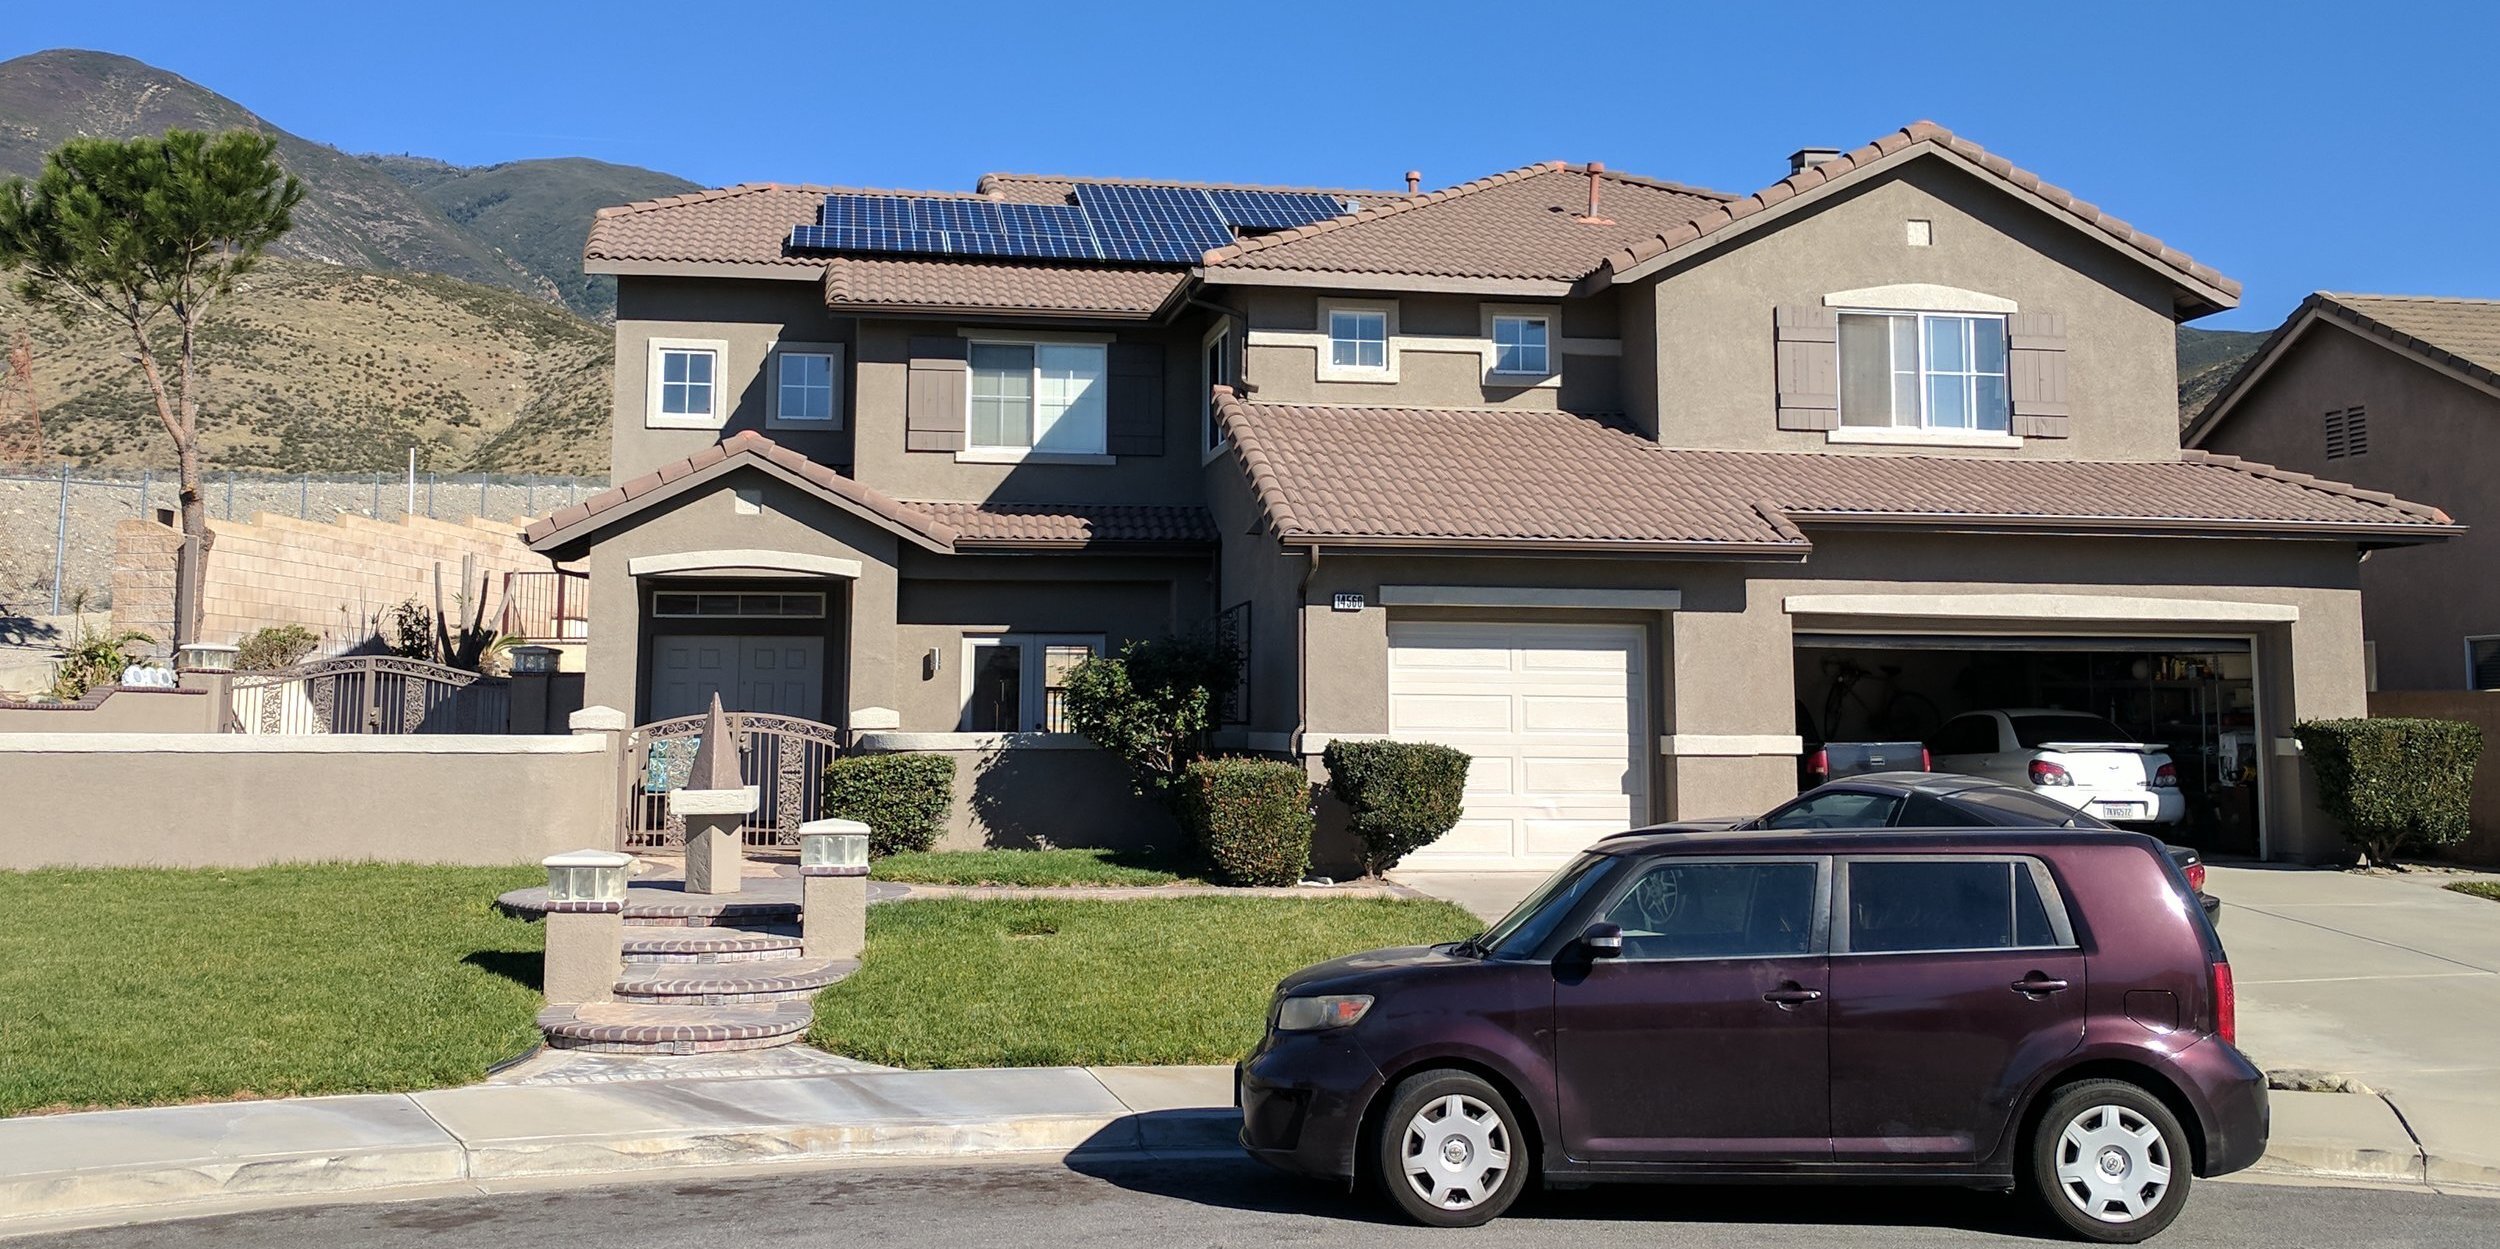 Should New Homeowners Consider Buying Solar Panels?